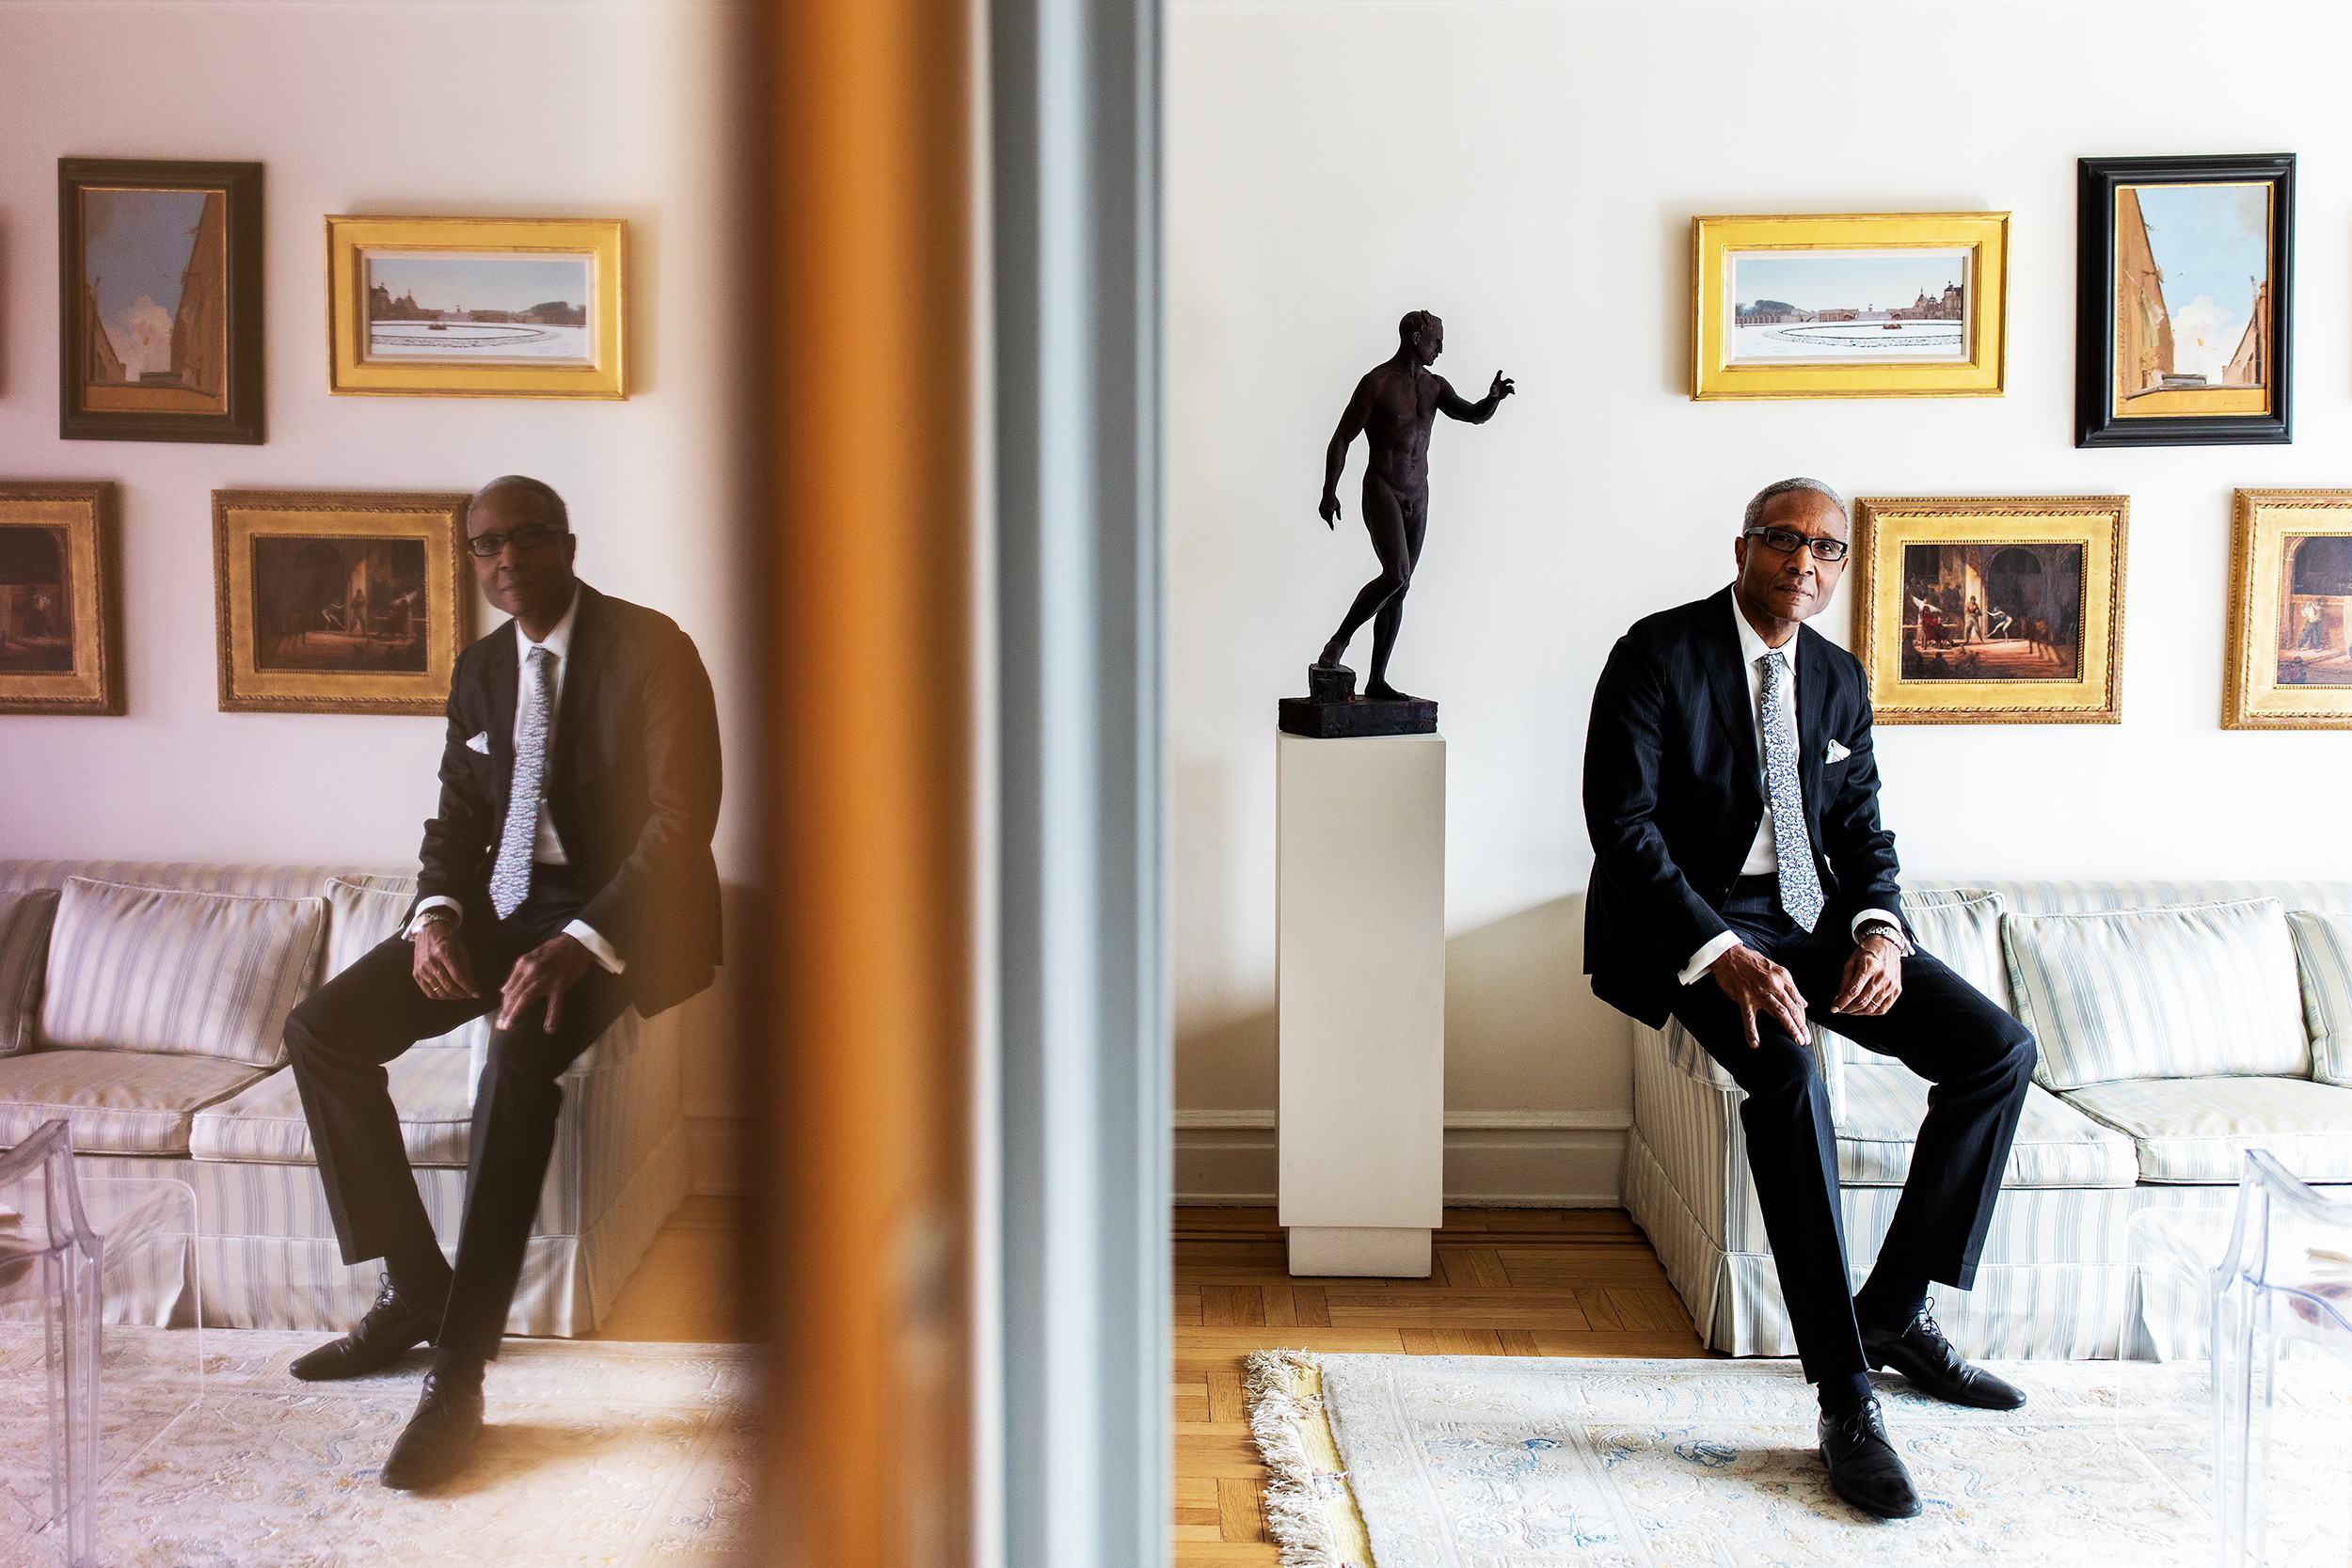  Senior corporate attorney, Gregory Peterson at his apartment in Manhattan, New York. Gregory is part of Columbia University’s Class of 1973, the first graduating class of affirmative action students at the school. Gregory is an avid art collector an